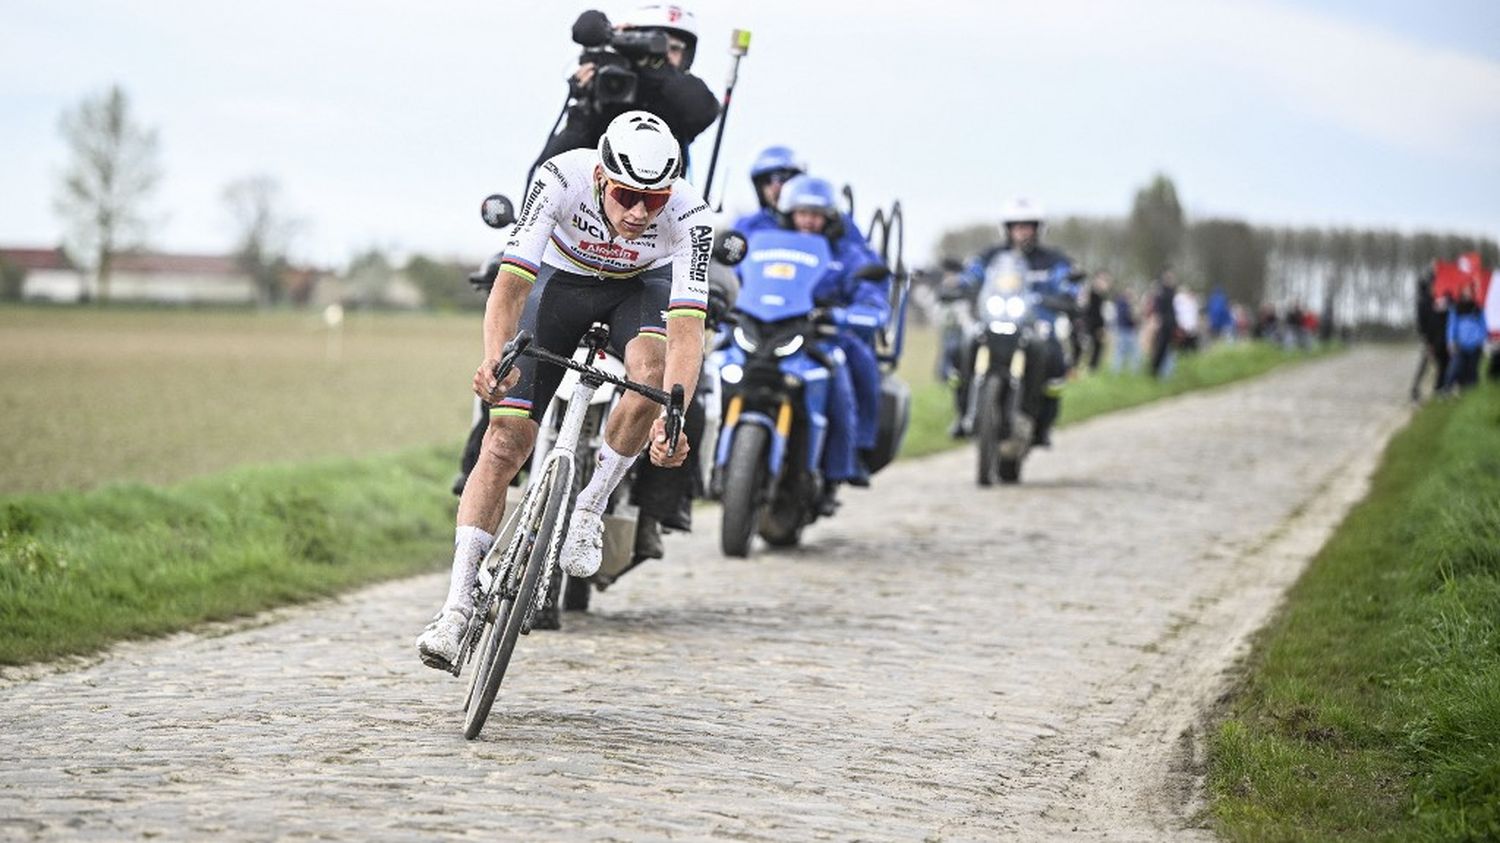 VIDEO.  Paris-Roubaix: relive the triumph of Mathieu van der Poel, master of the cobblestones of the Hell of the North